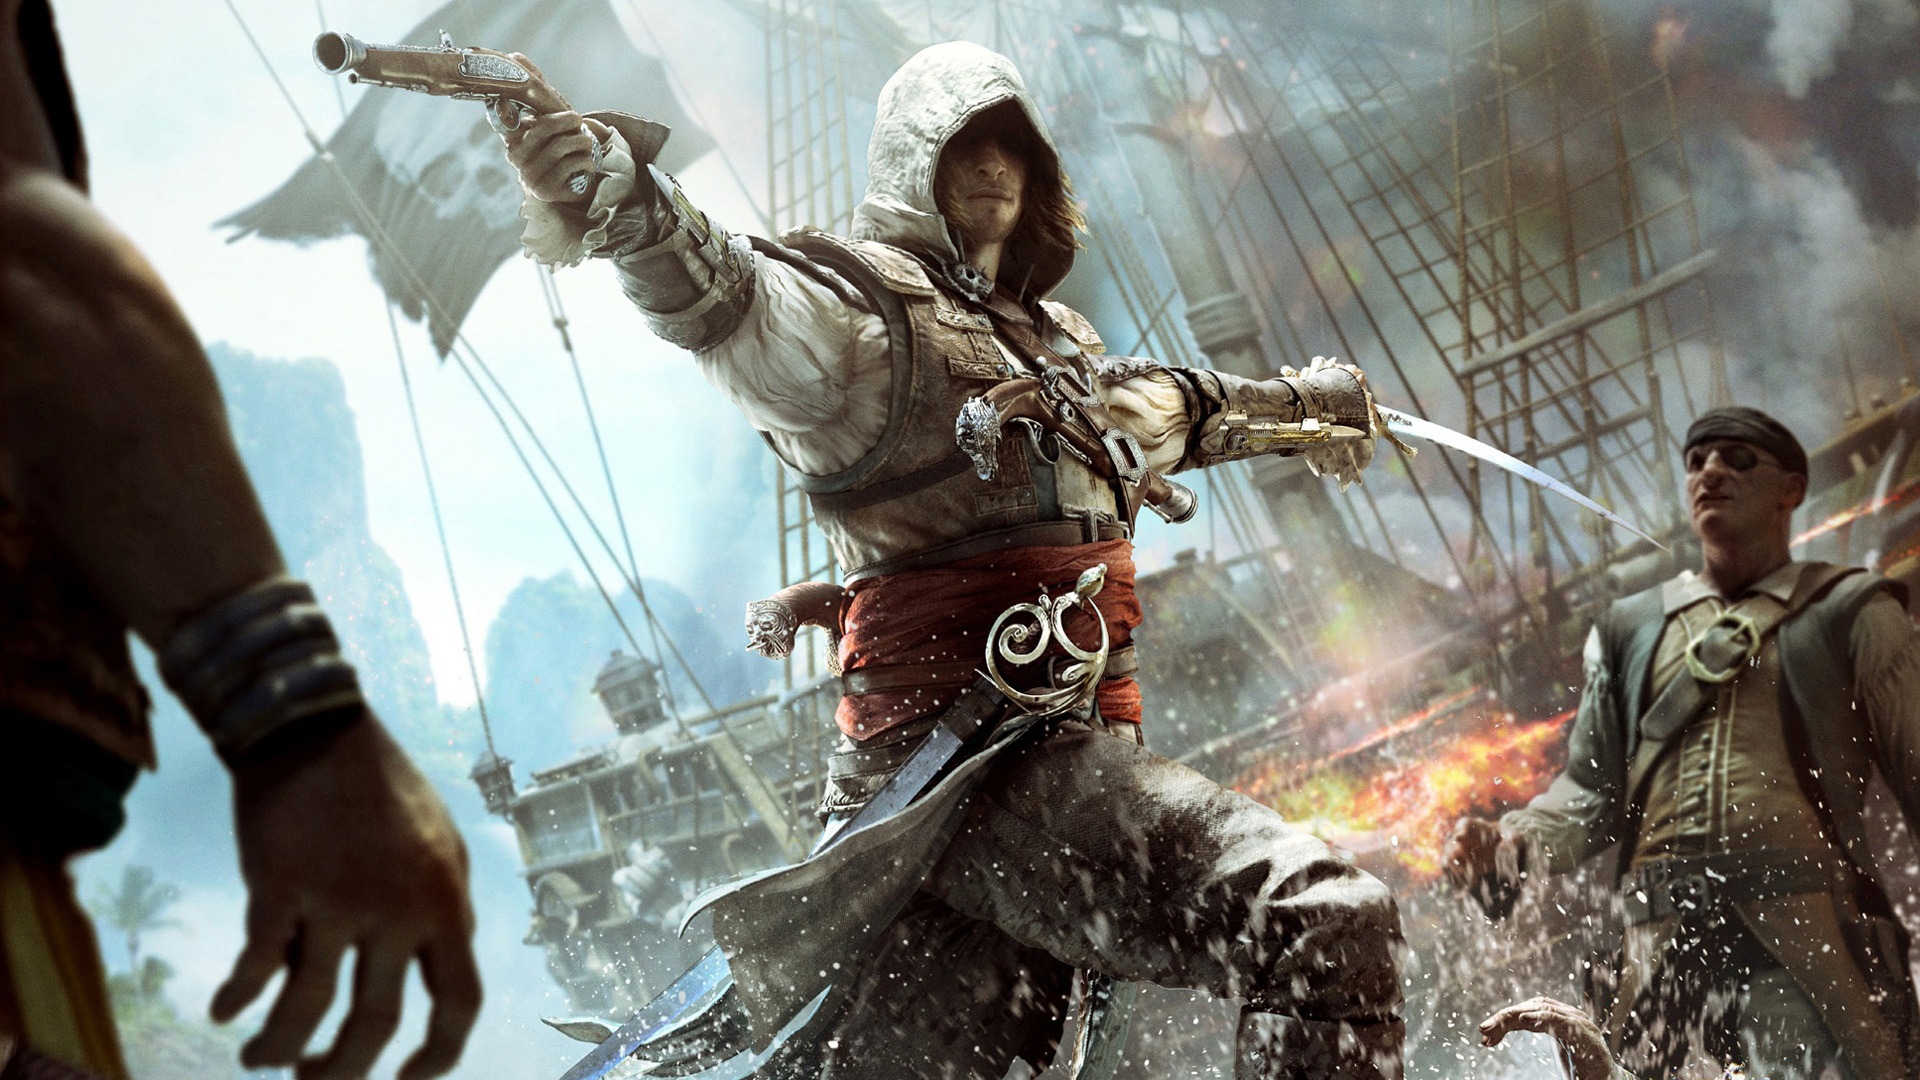 Assassin Creed 4 for 1920 x 1080 HDTV 1080p resolution